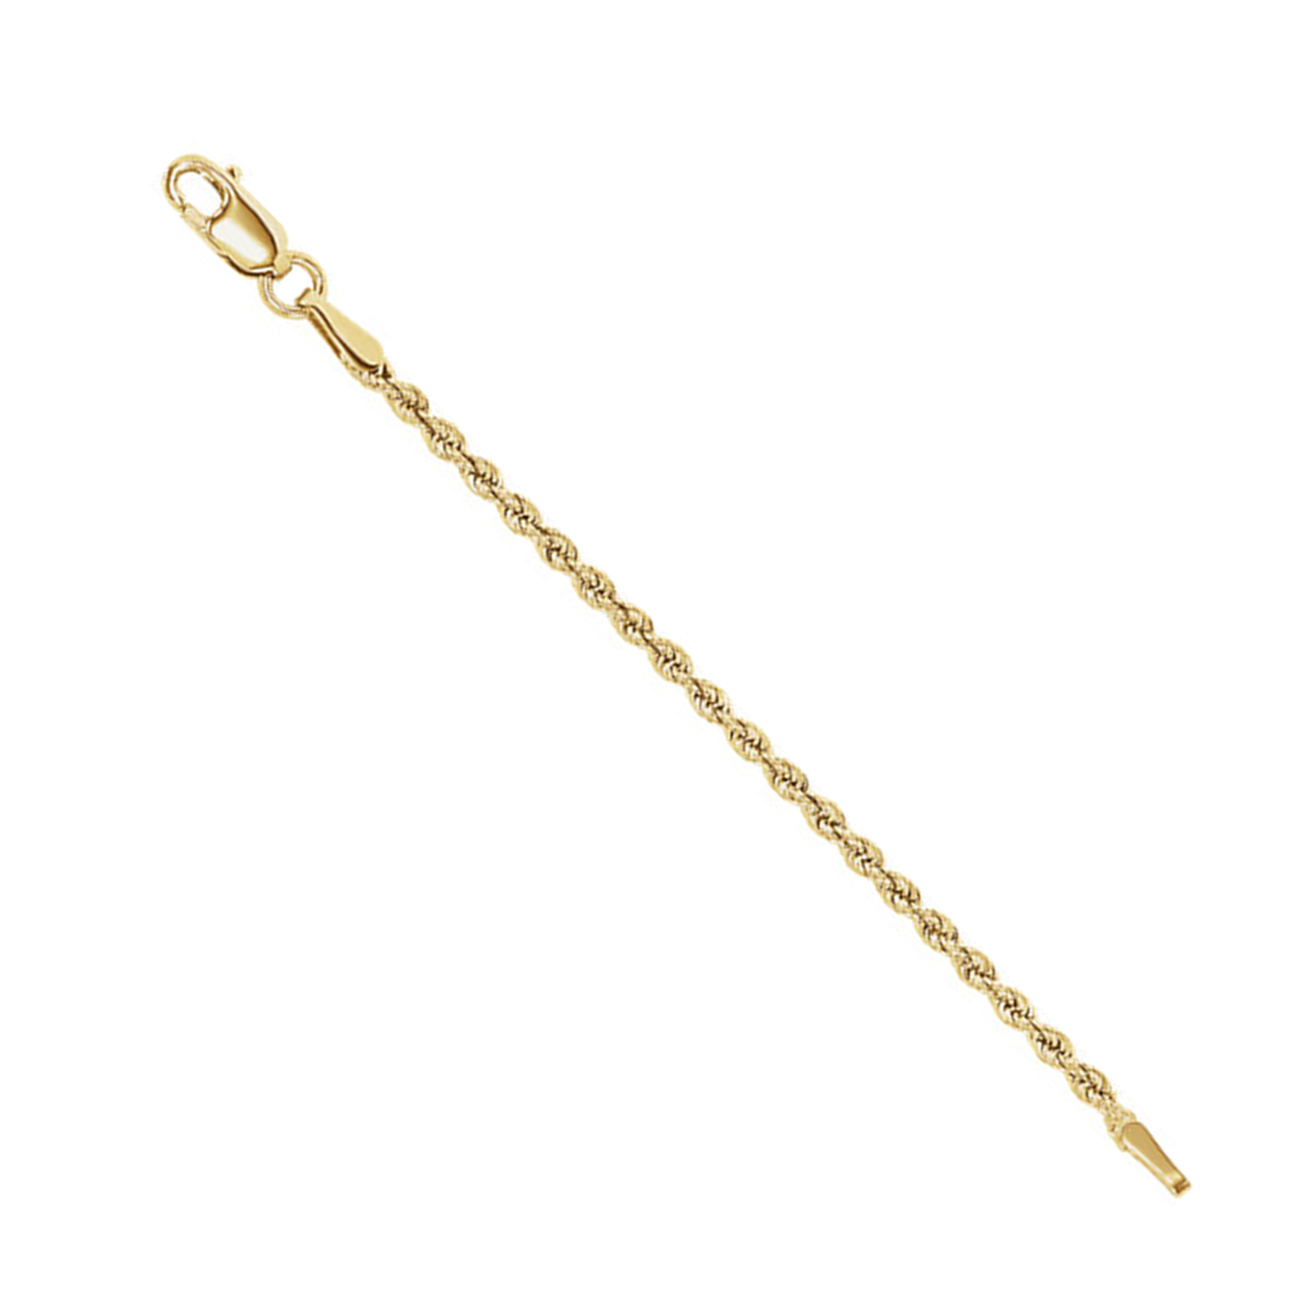 1.85 millimeter 14k yellow gold rope extender-safety chain in 2.25 and 3 inch lengths; finished with a lobster clasp.